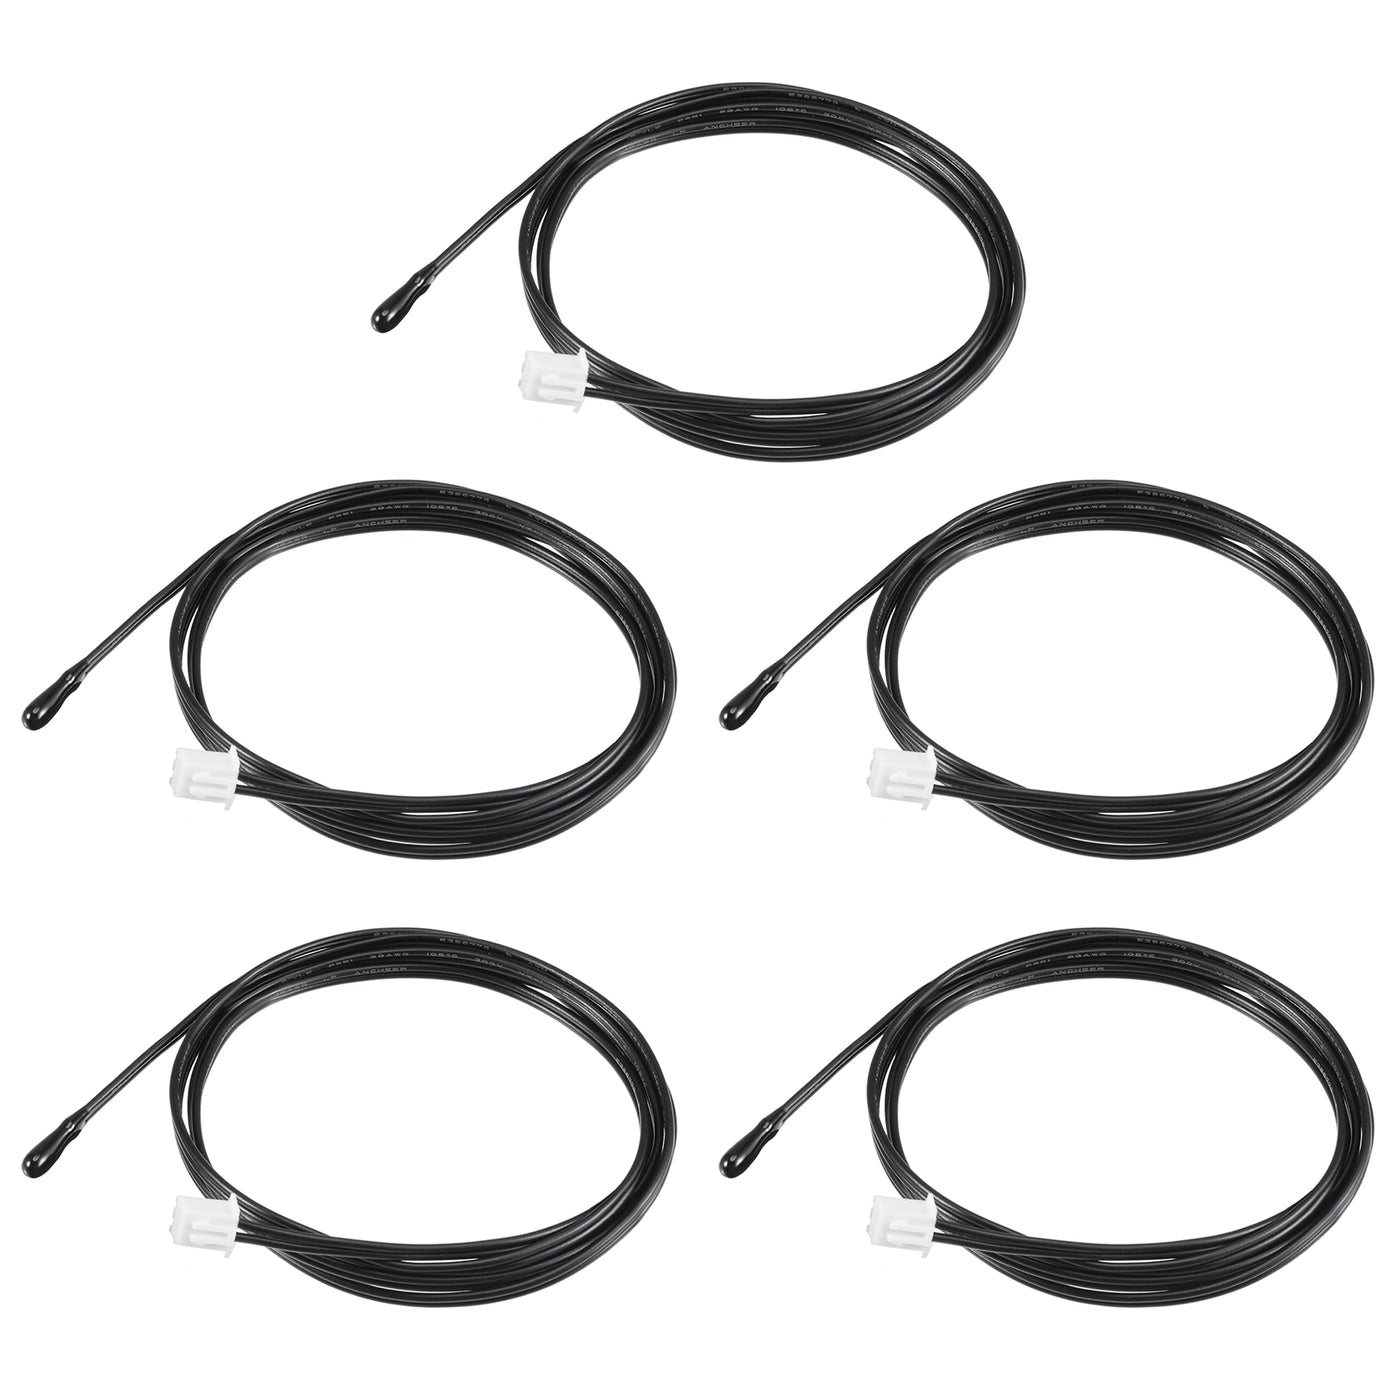 uxcell Uxcell 5pcs 5K NTC Temperature Sensor Probe 3.3ft Digital Thermometer Extension Cable